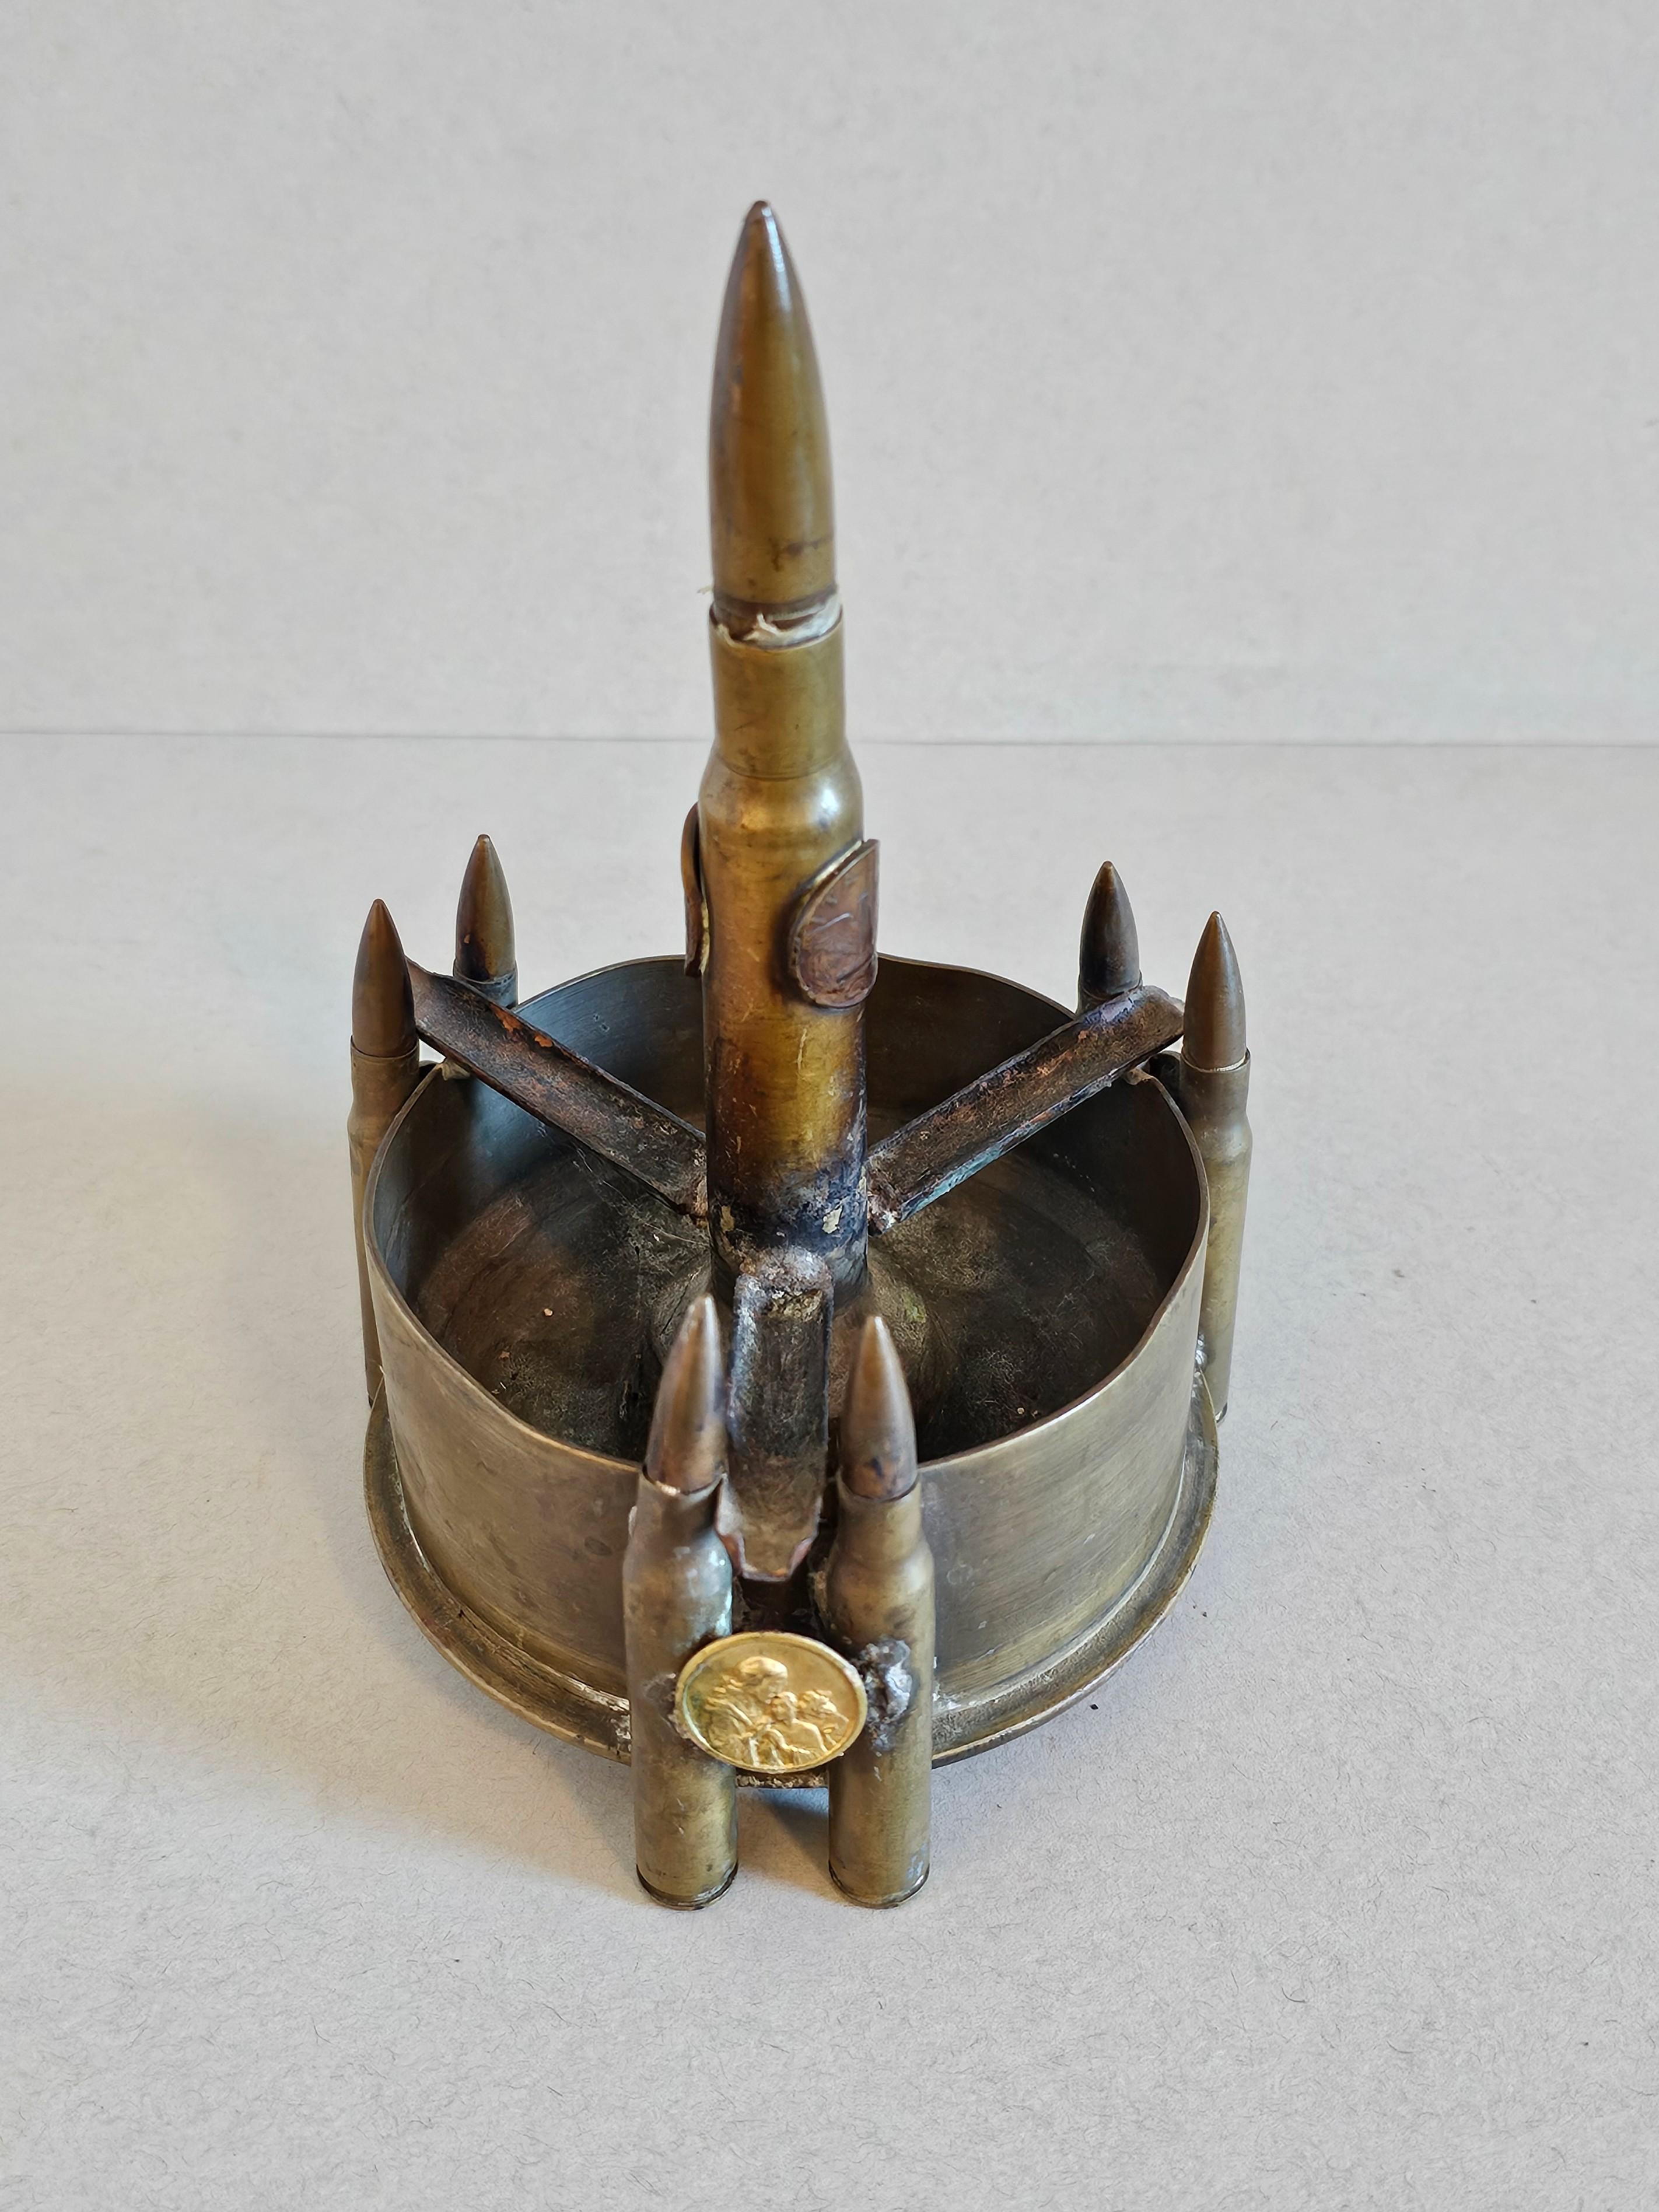 A fascinating Word War II trench art sculptural ammo ashtray.

Typically hand-crafted by a soldier from found objects during their down time at war, especially in the trenches of WW1, hence the name, this interesting munitions folk art work consists